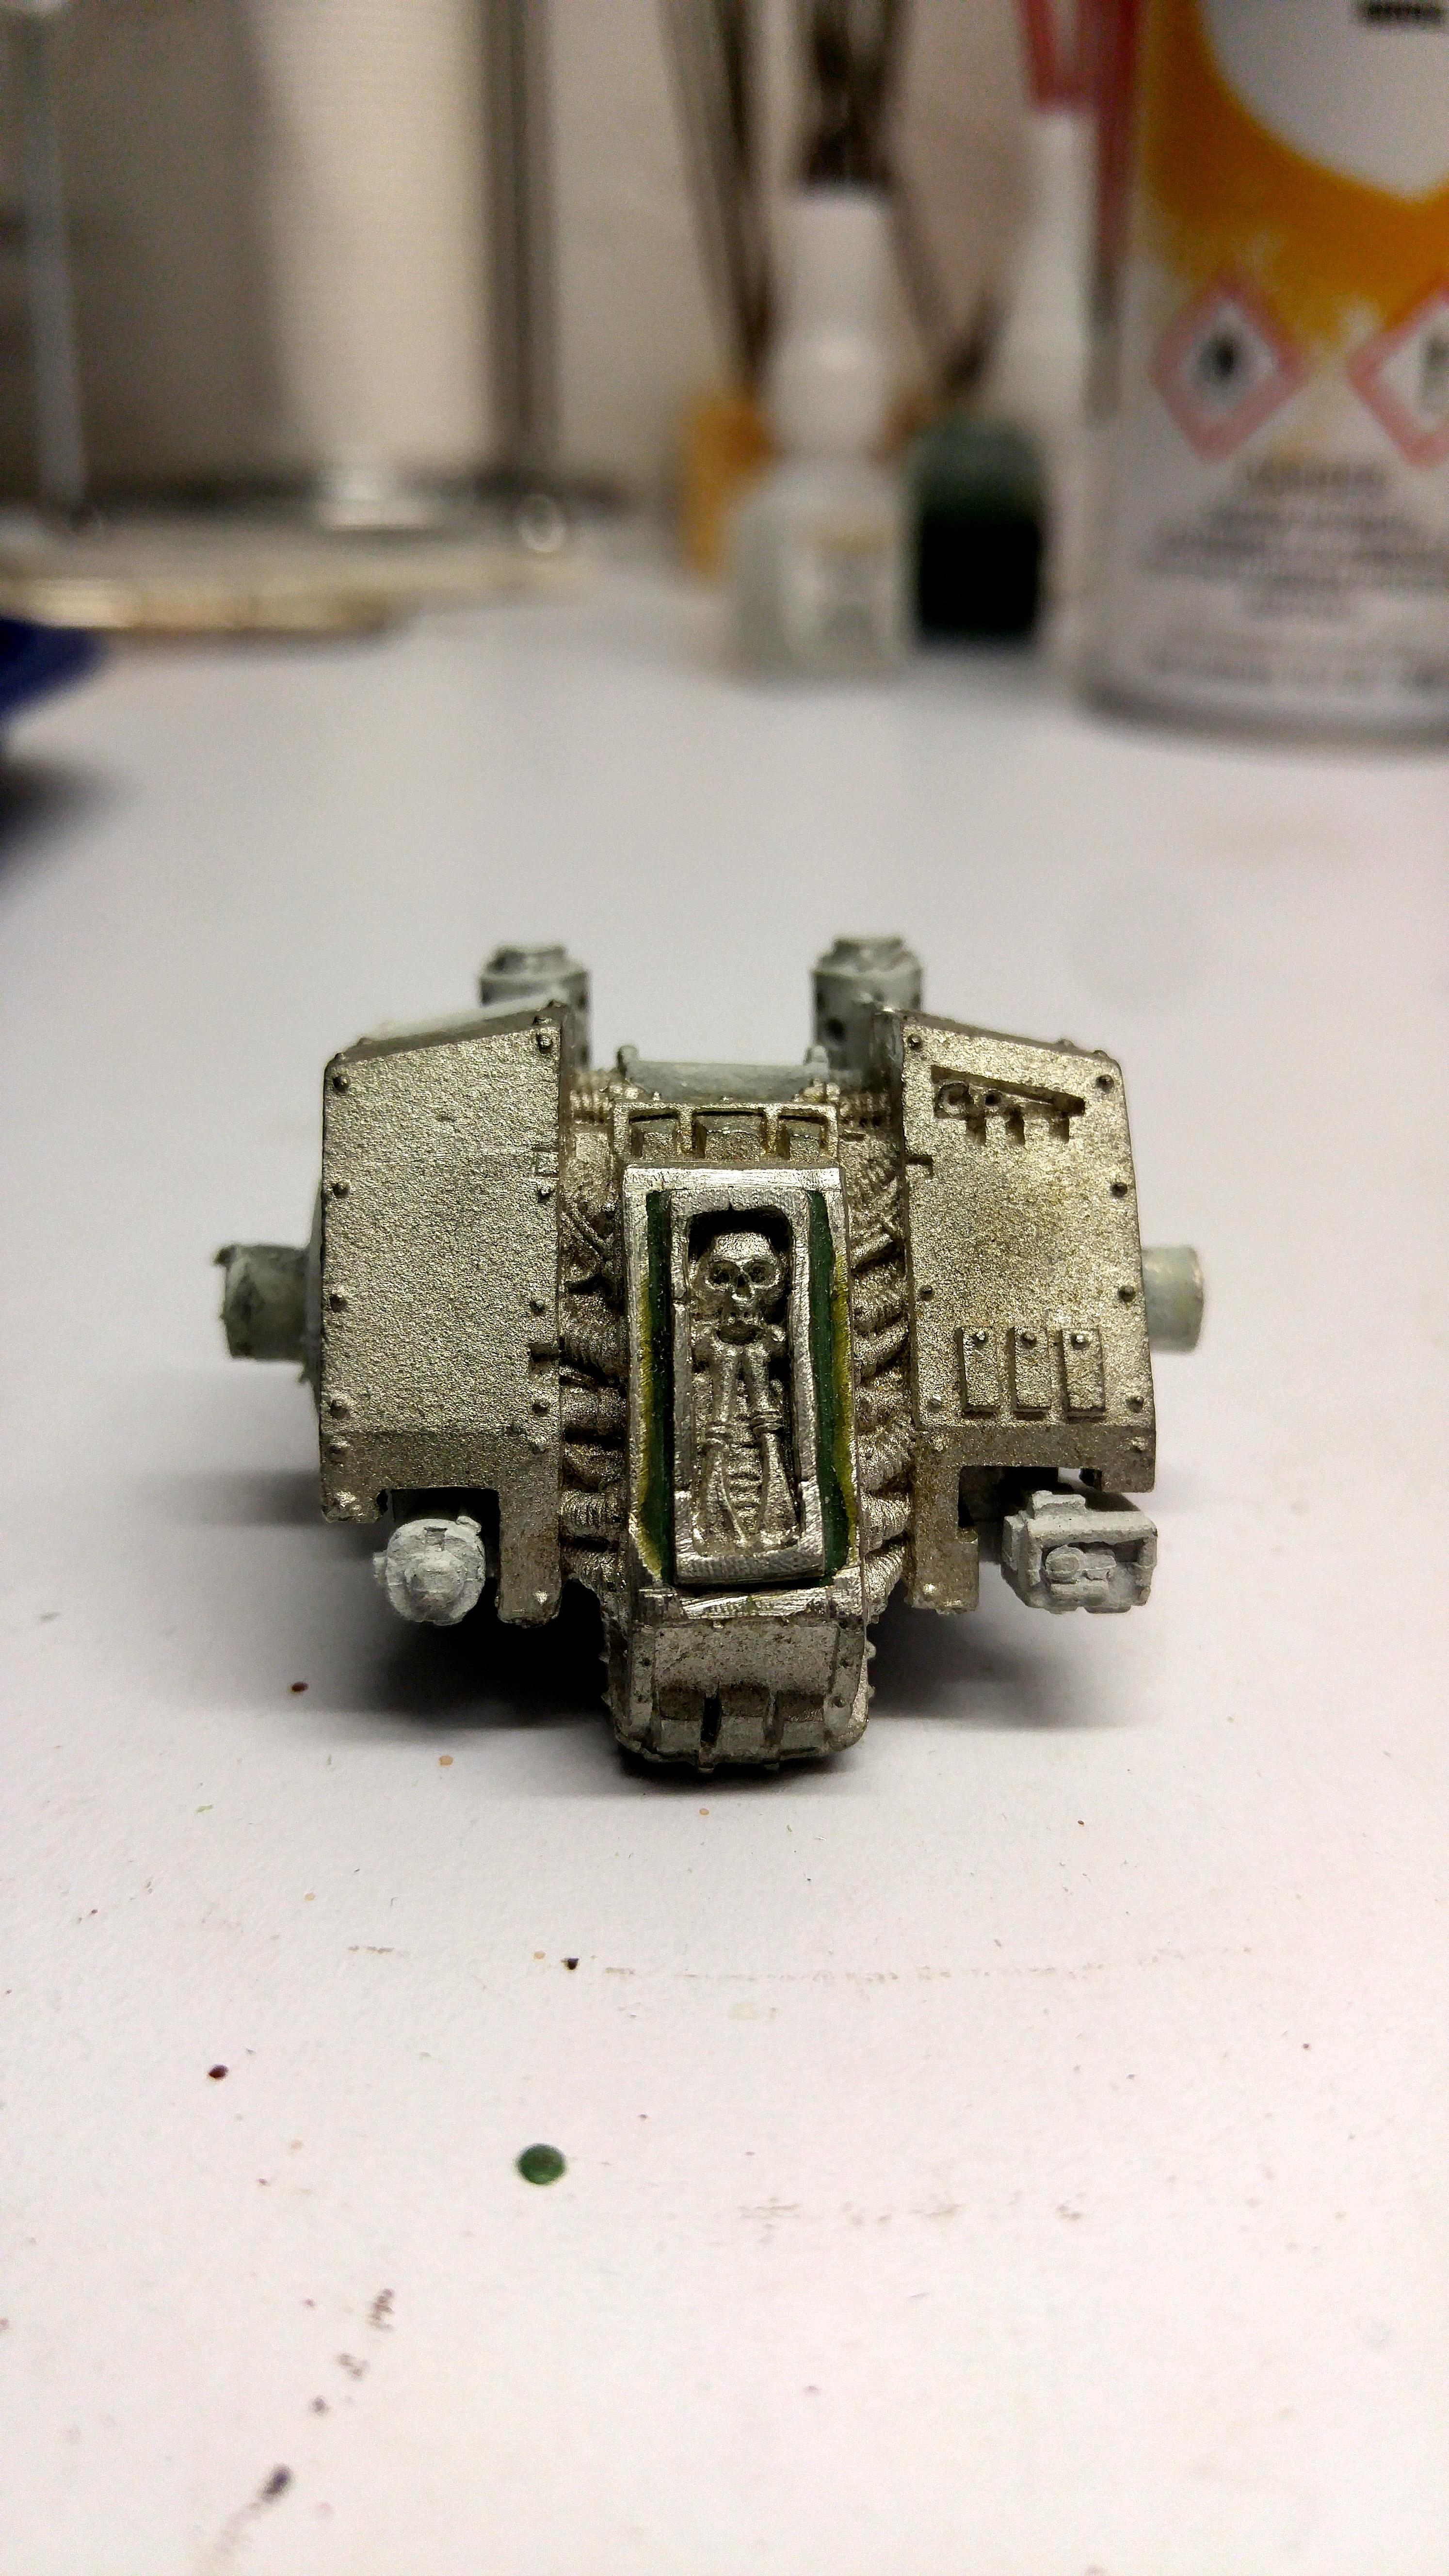 Early dreadnought conversion with Imperial Preacher's icon